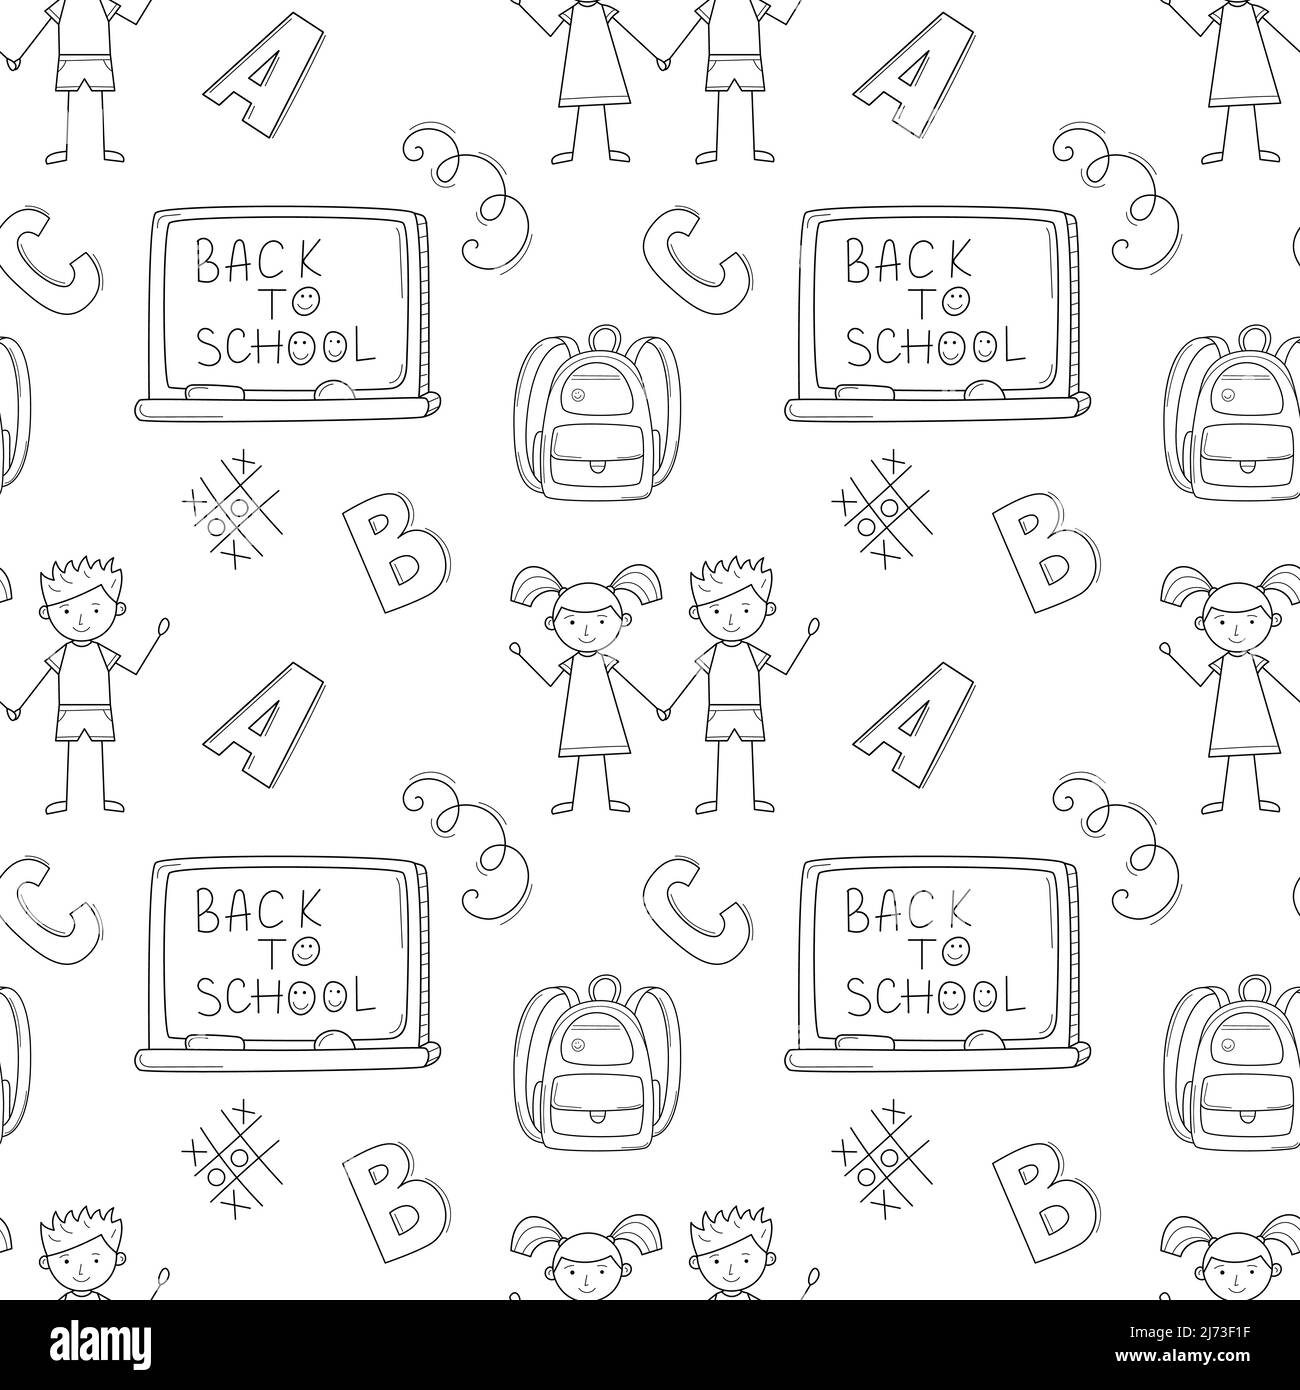 A simple seamless school pattern with cute boy and girl drawn in a childish style. Blackboard, backpack, letters. Black and white background with isol Stock Vector